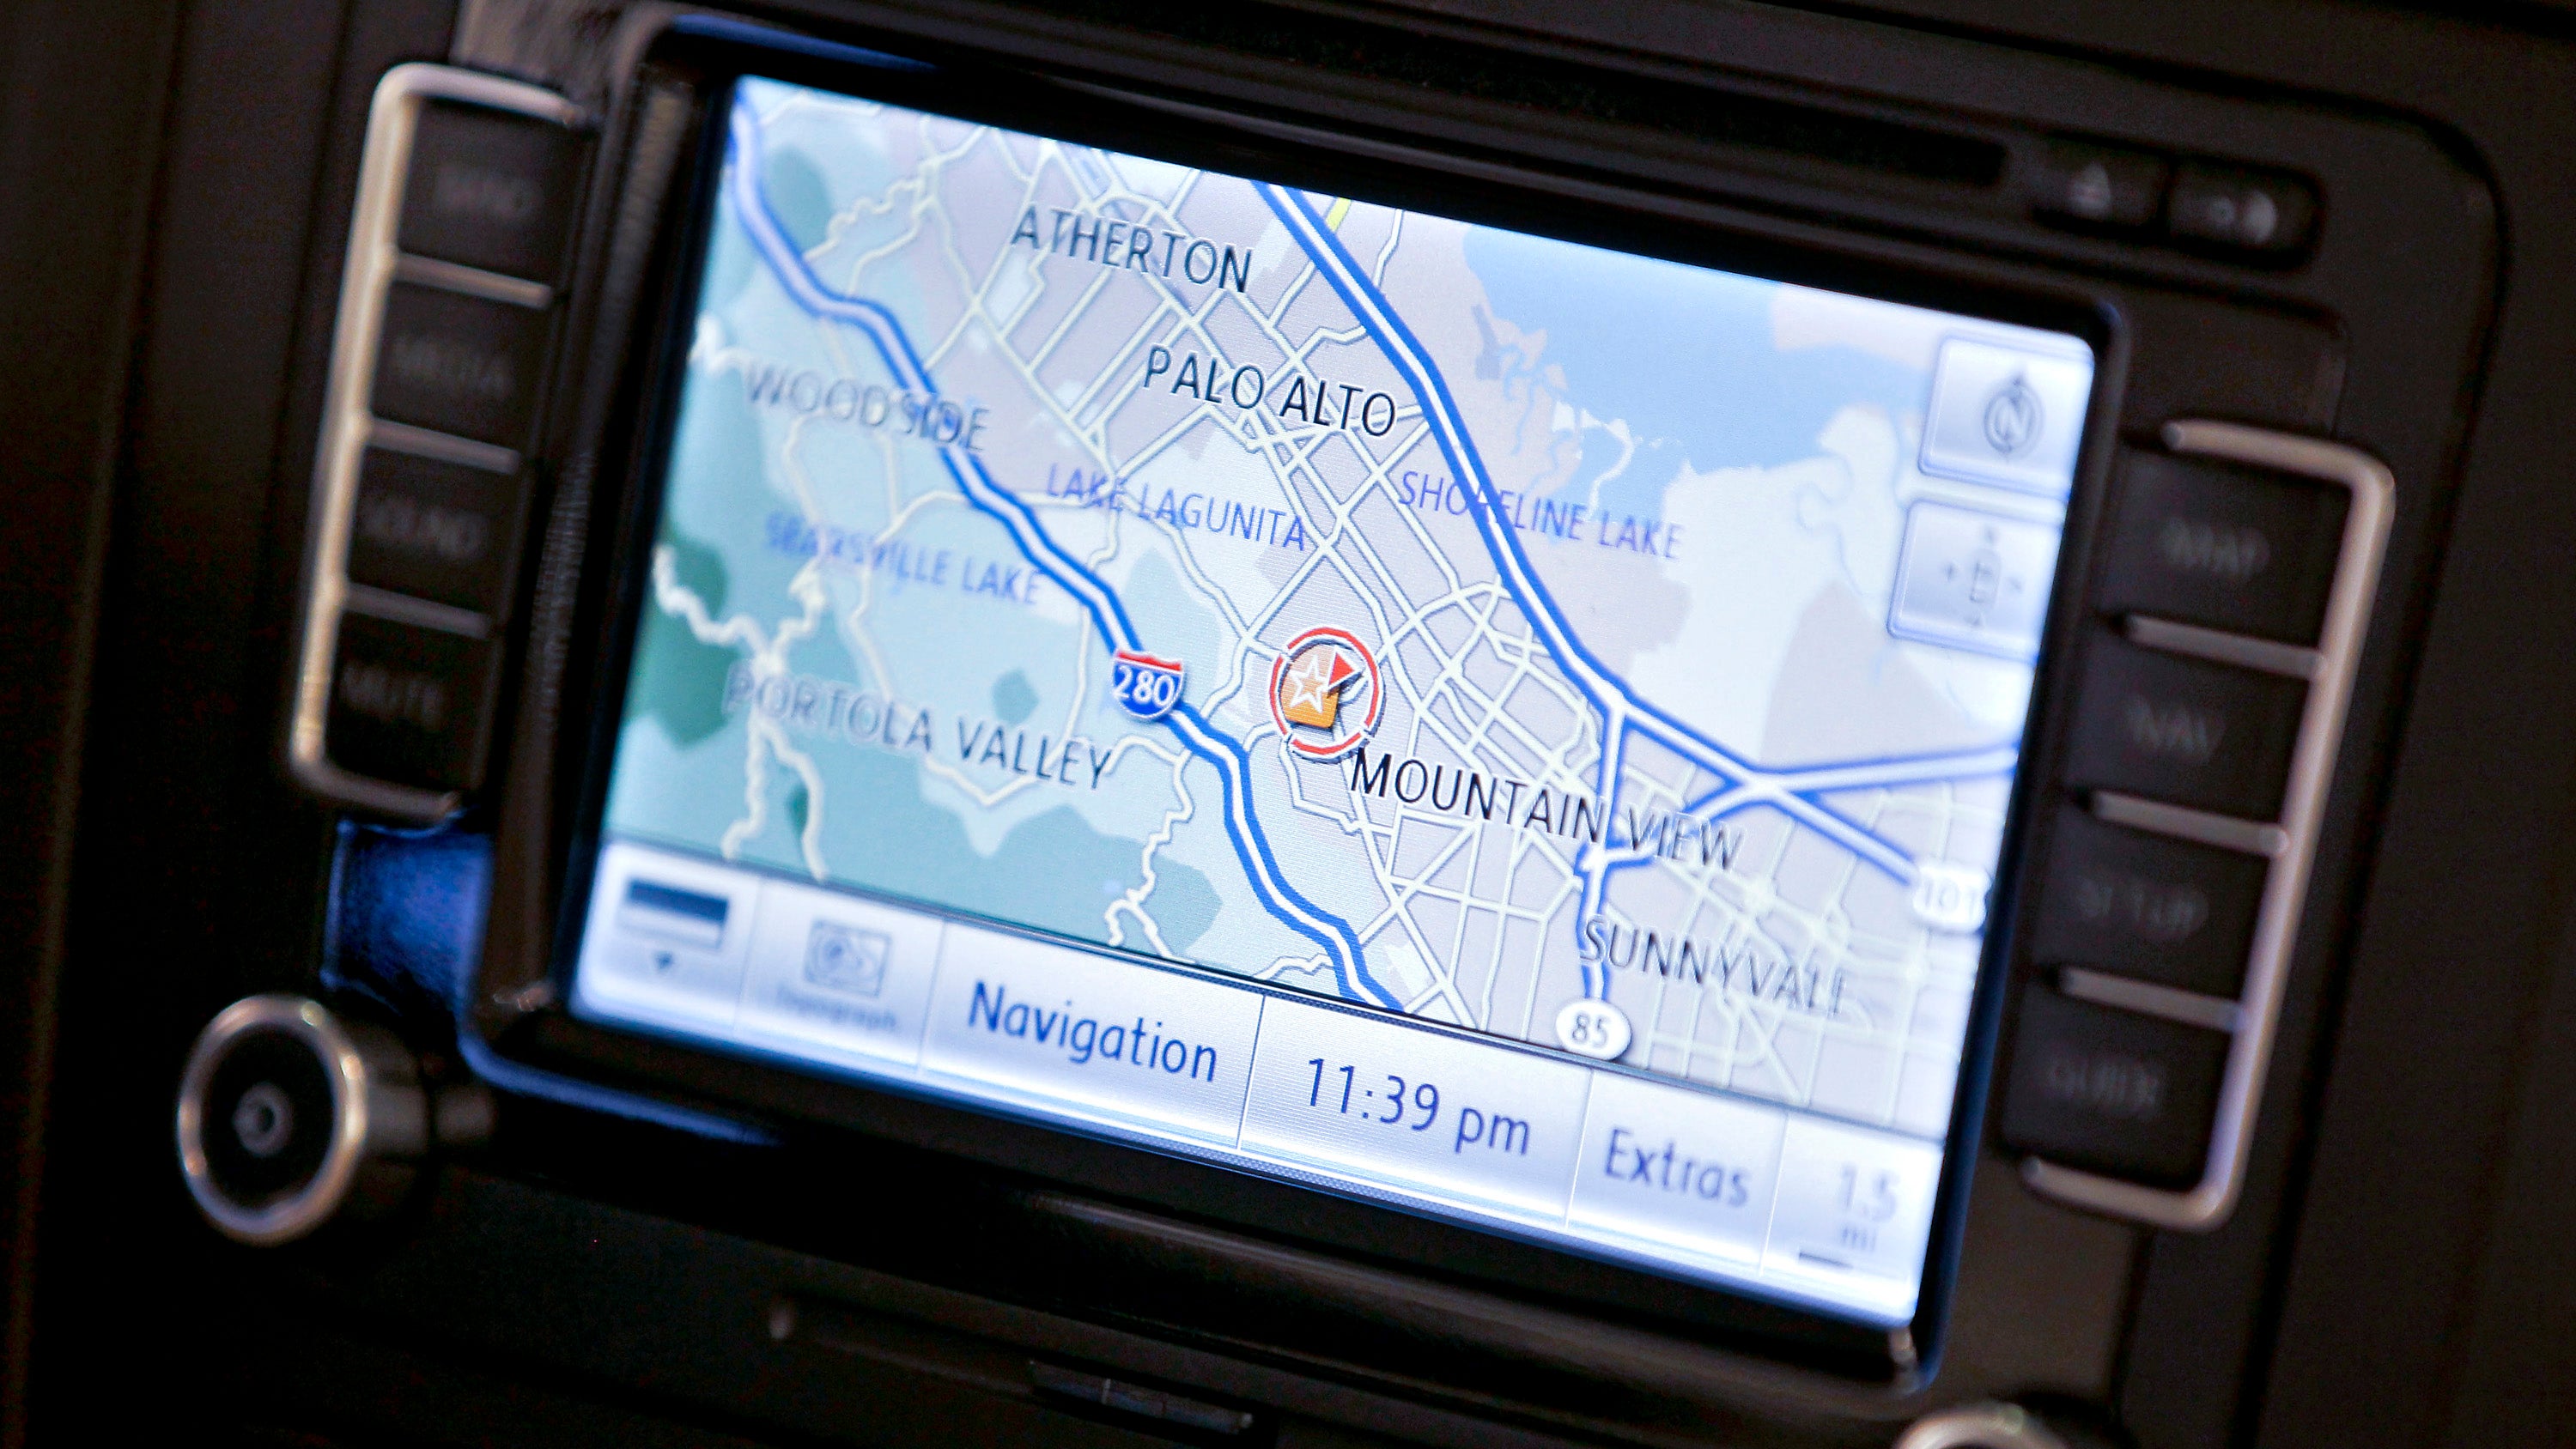 Advertisements Are Coming to Your Car’s Infotainment System